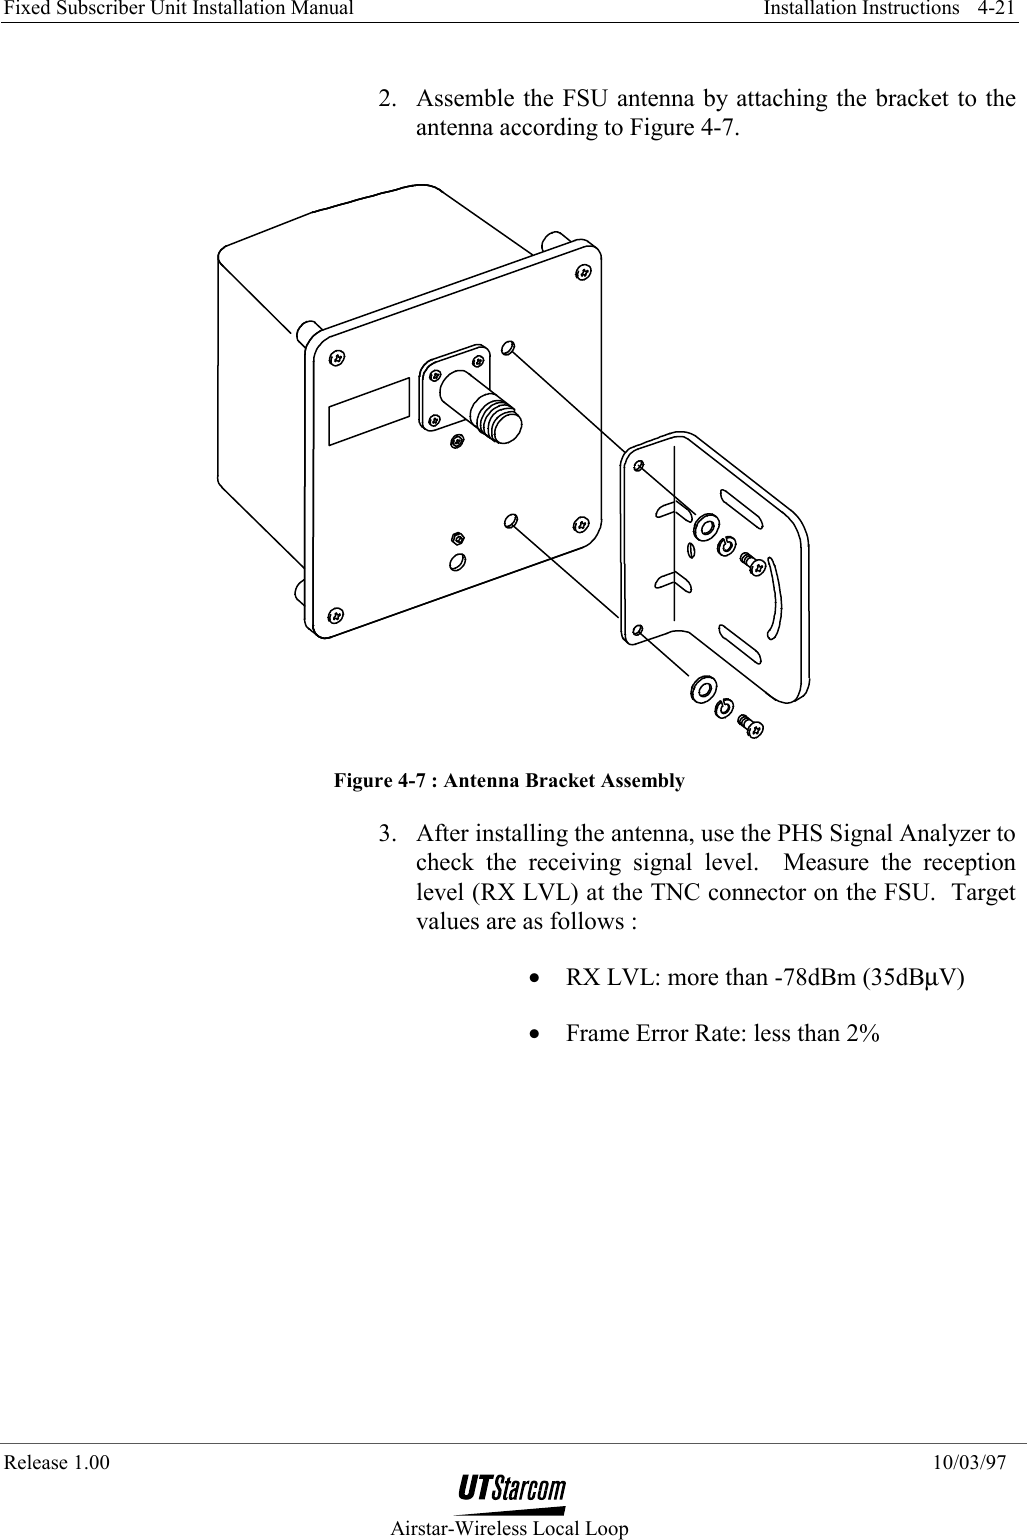 Fixed Subscriber Unit Installation Manual     Installation Instructions  Release 1.00    10/03/97  Airstar-Wireless Local Loop 4-21 2.  Assemble the FSU antenna by attaching the bracket to the antenna according to Figure 4-7.  Figure 4-7 : Antenna Bracket Assembly 3.  After installing the antenna, use the PHS Signal Analyzer to check the receiving signal level.  Measure the reception level (RX LVL) at the TNC connector on the FSU.  Target values are as follows : •  RX LVL: more than -78dBm (35dBµV) •  Frame Error Rate: less than 2% 